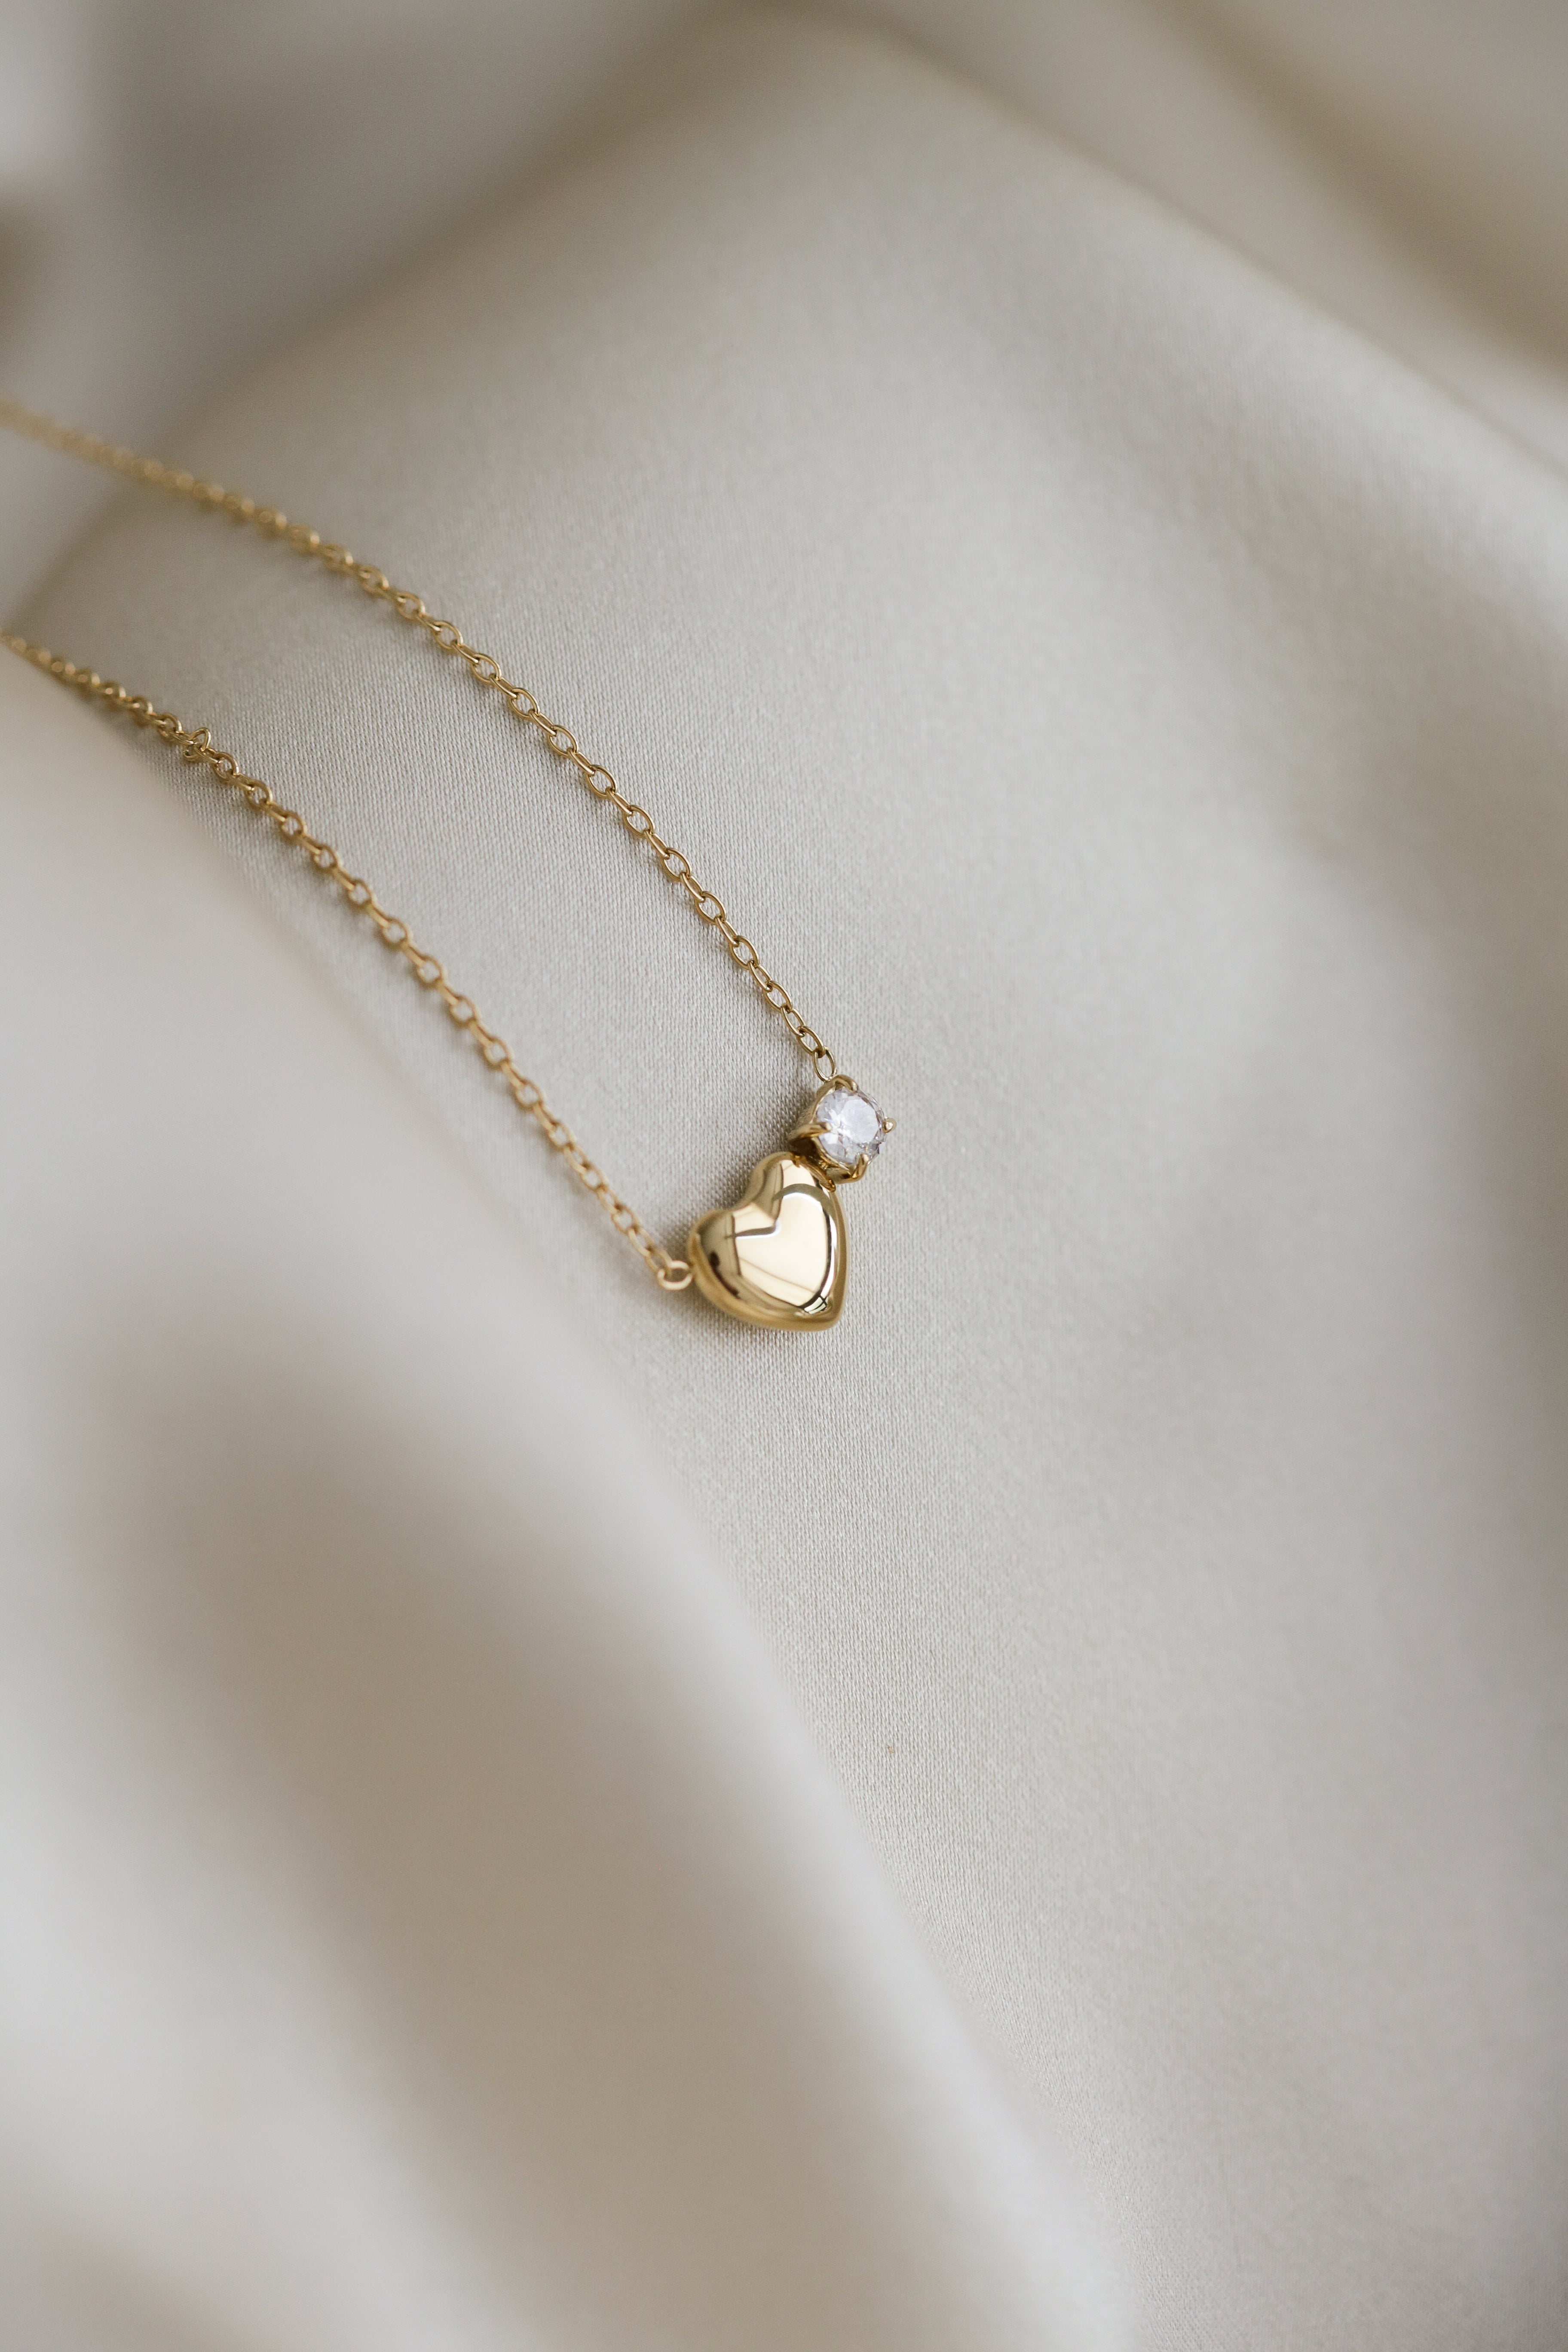 The Heart - Single Cubic Zirconia Necklace - Boutique Minimaliste has waterproof, durable, elegant and vintage inspired jewelry